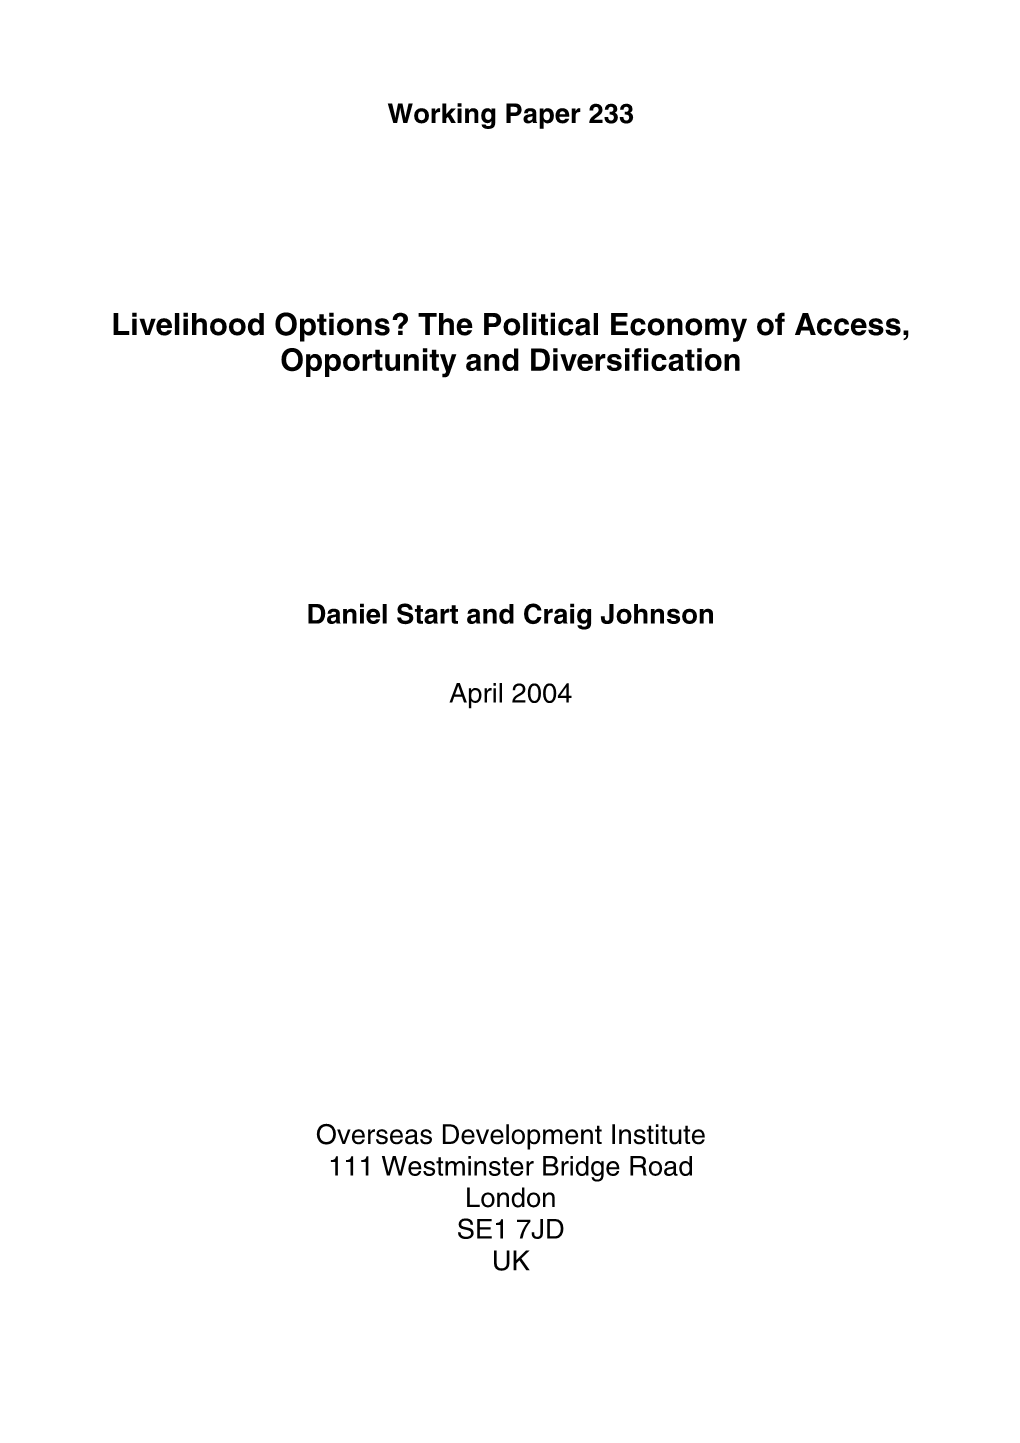 The Political Economy of Access, Opportunity and Diversification